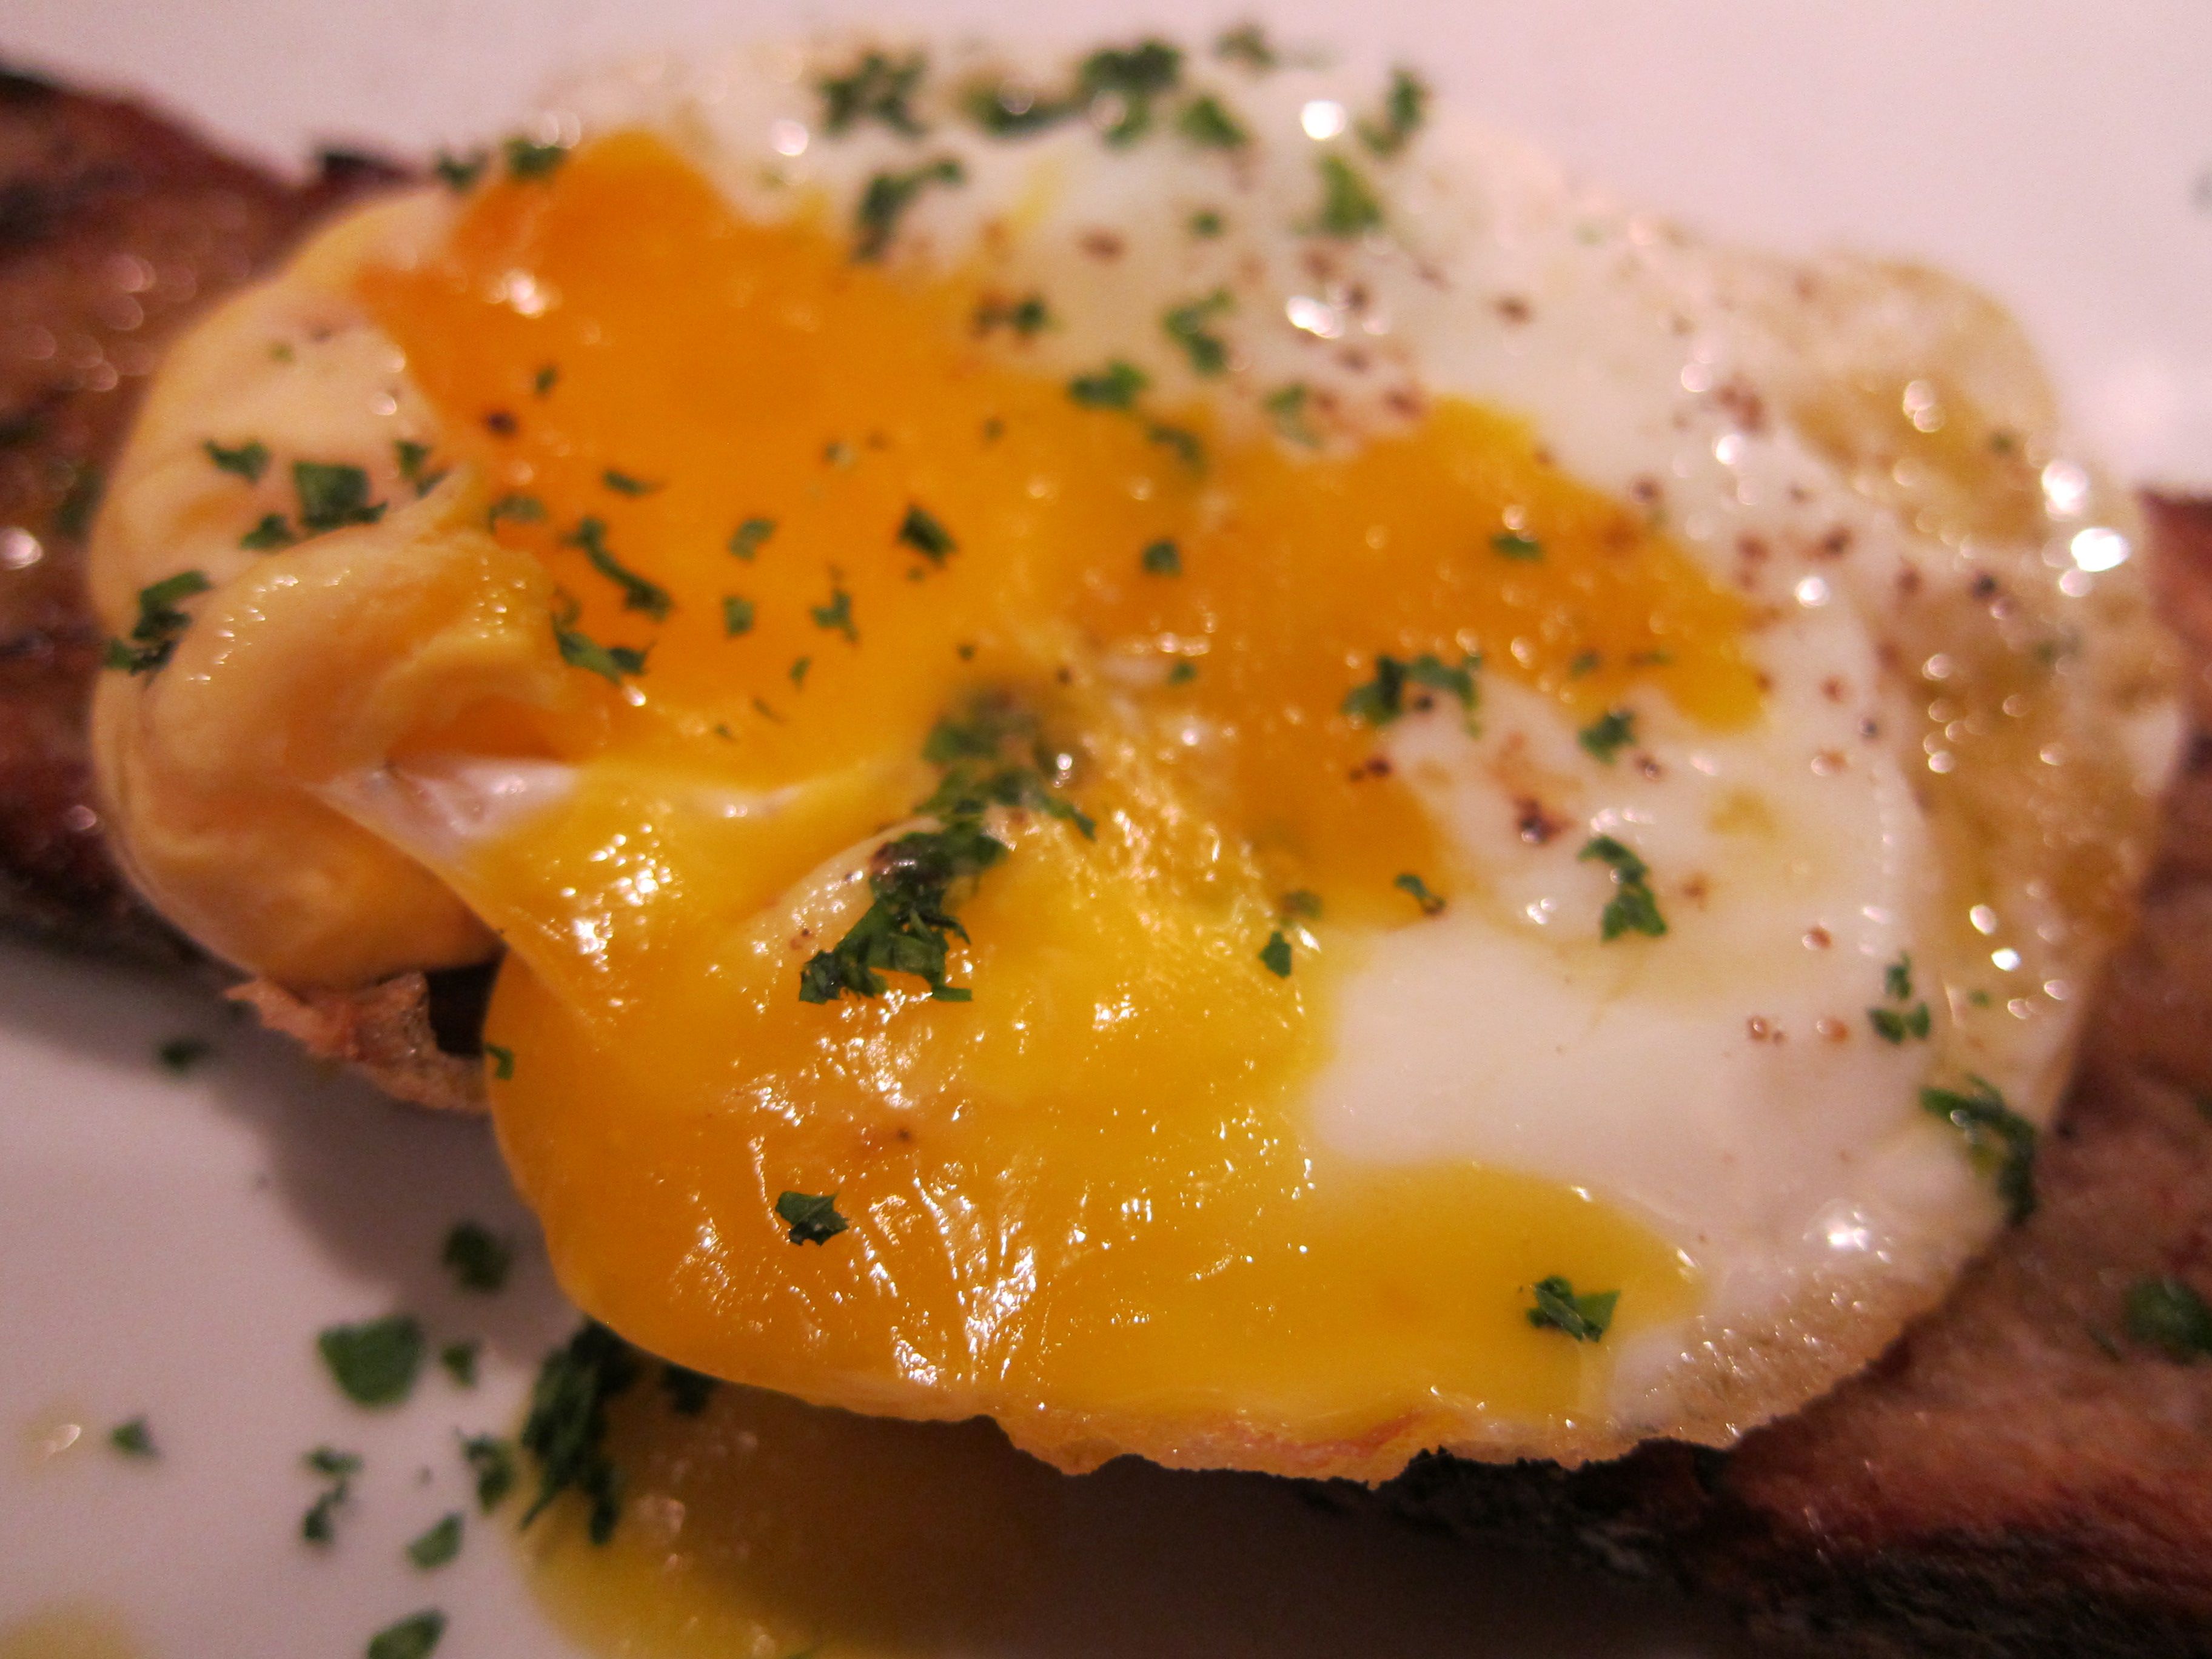 Best Fried Egg Ever: The Ingredient That Makes All the Difference